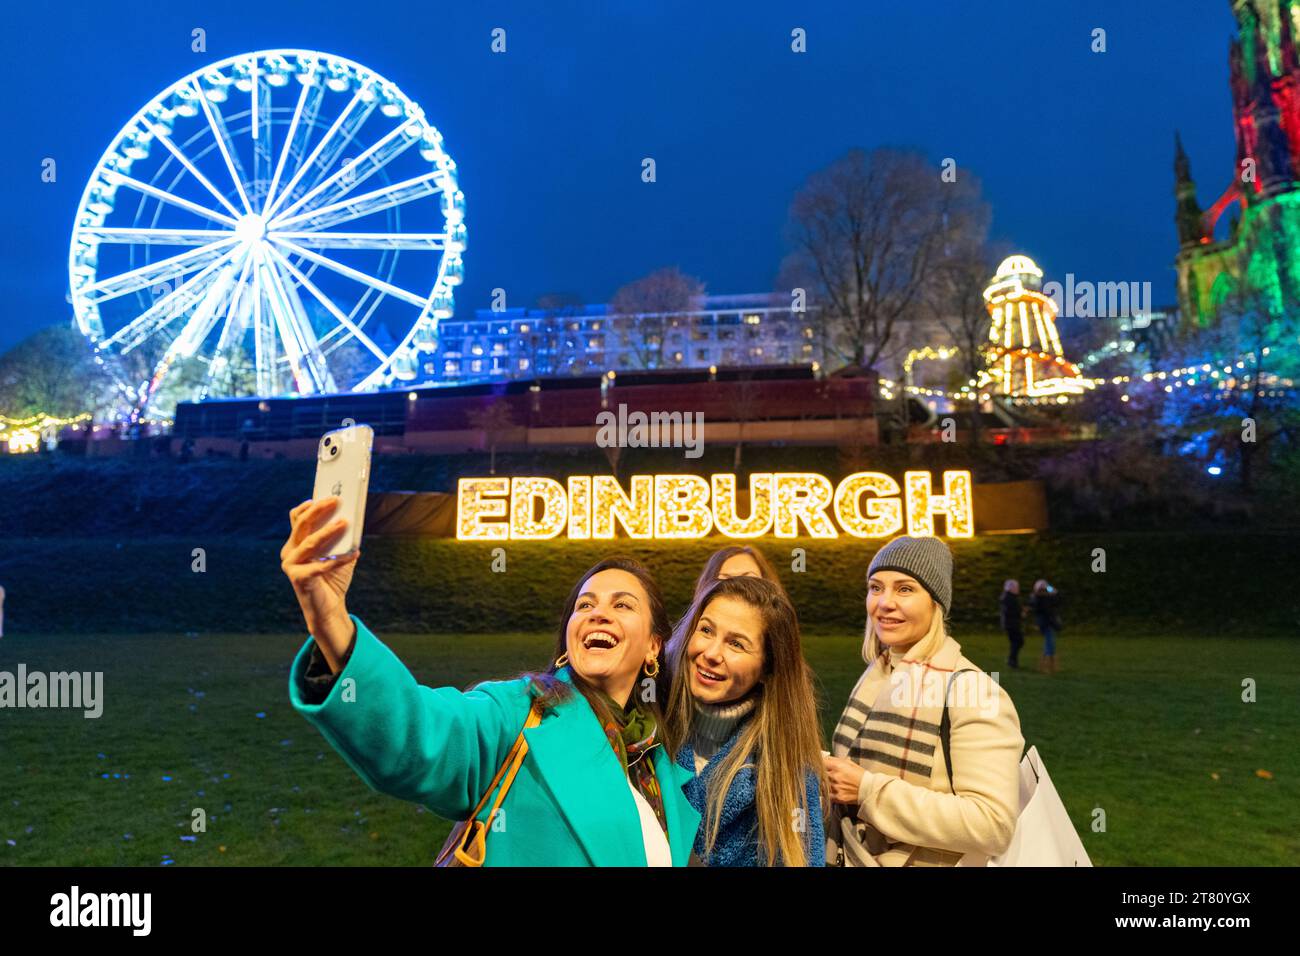 Edinburgh, Scotland, UK. 17th November, 2023. The traditional Christmas Market in East Prices Street garden opened this evening and was quickly thronged with tourists and locals. Pic; Female tourists from Newcastle pose for a selfie in front of a large illuminated sign. Iain Masterton/Alamy Live News Stock Photo